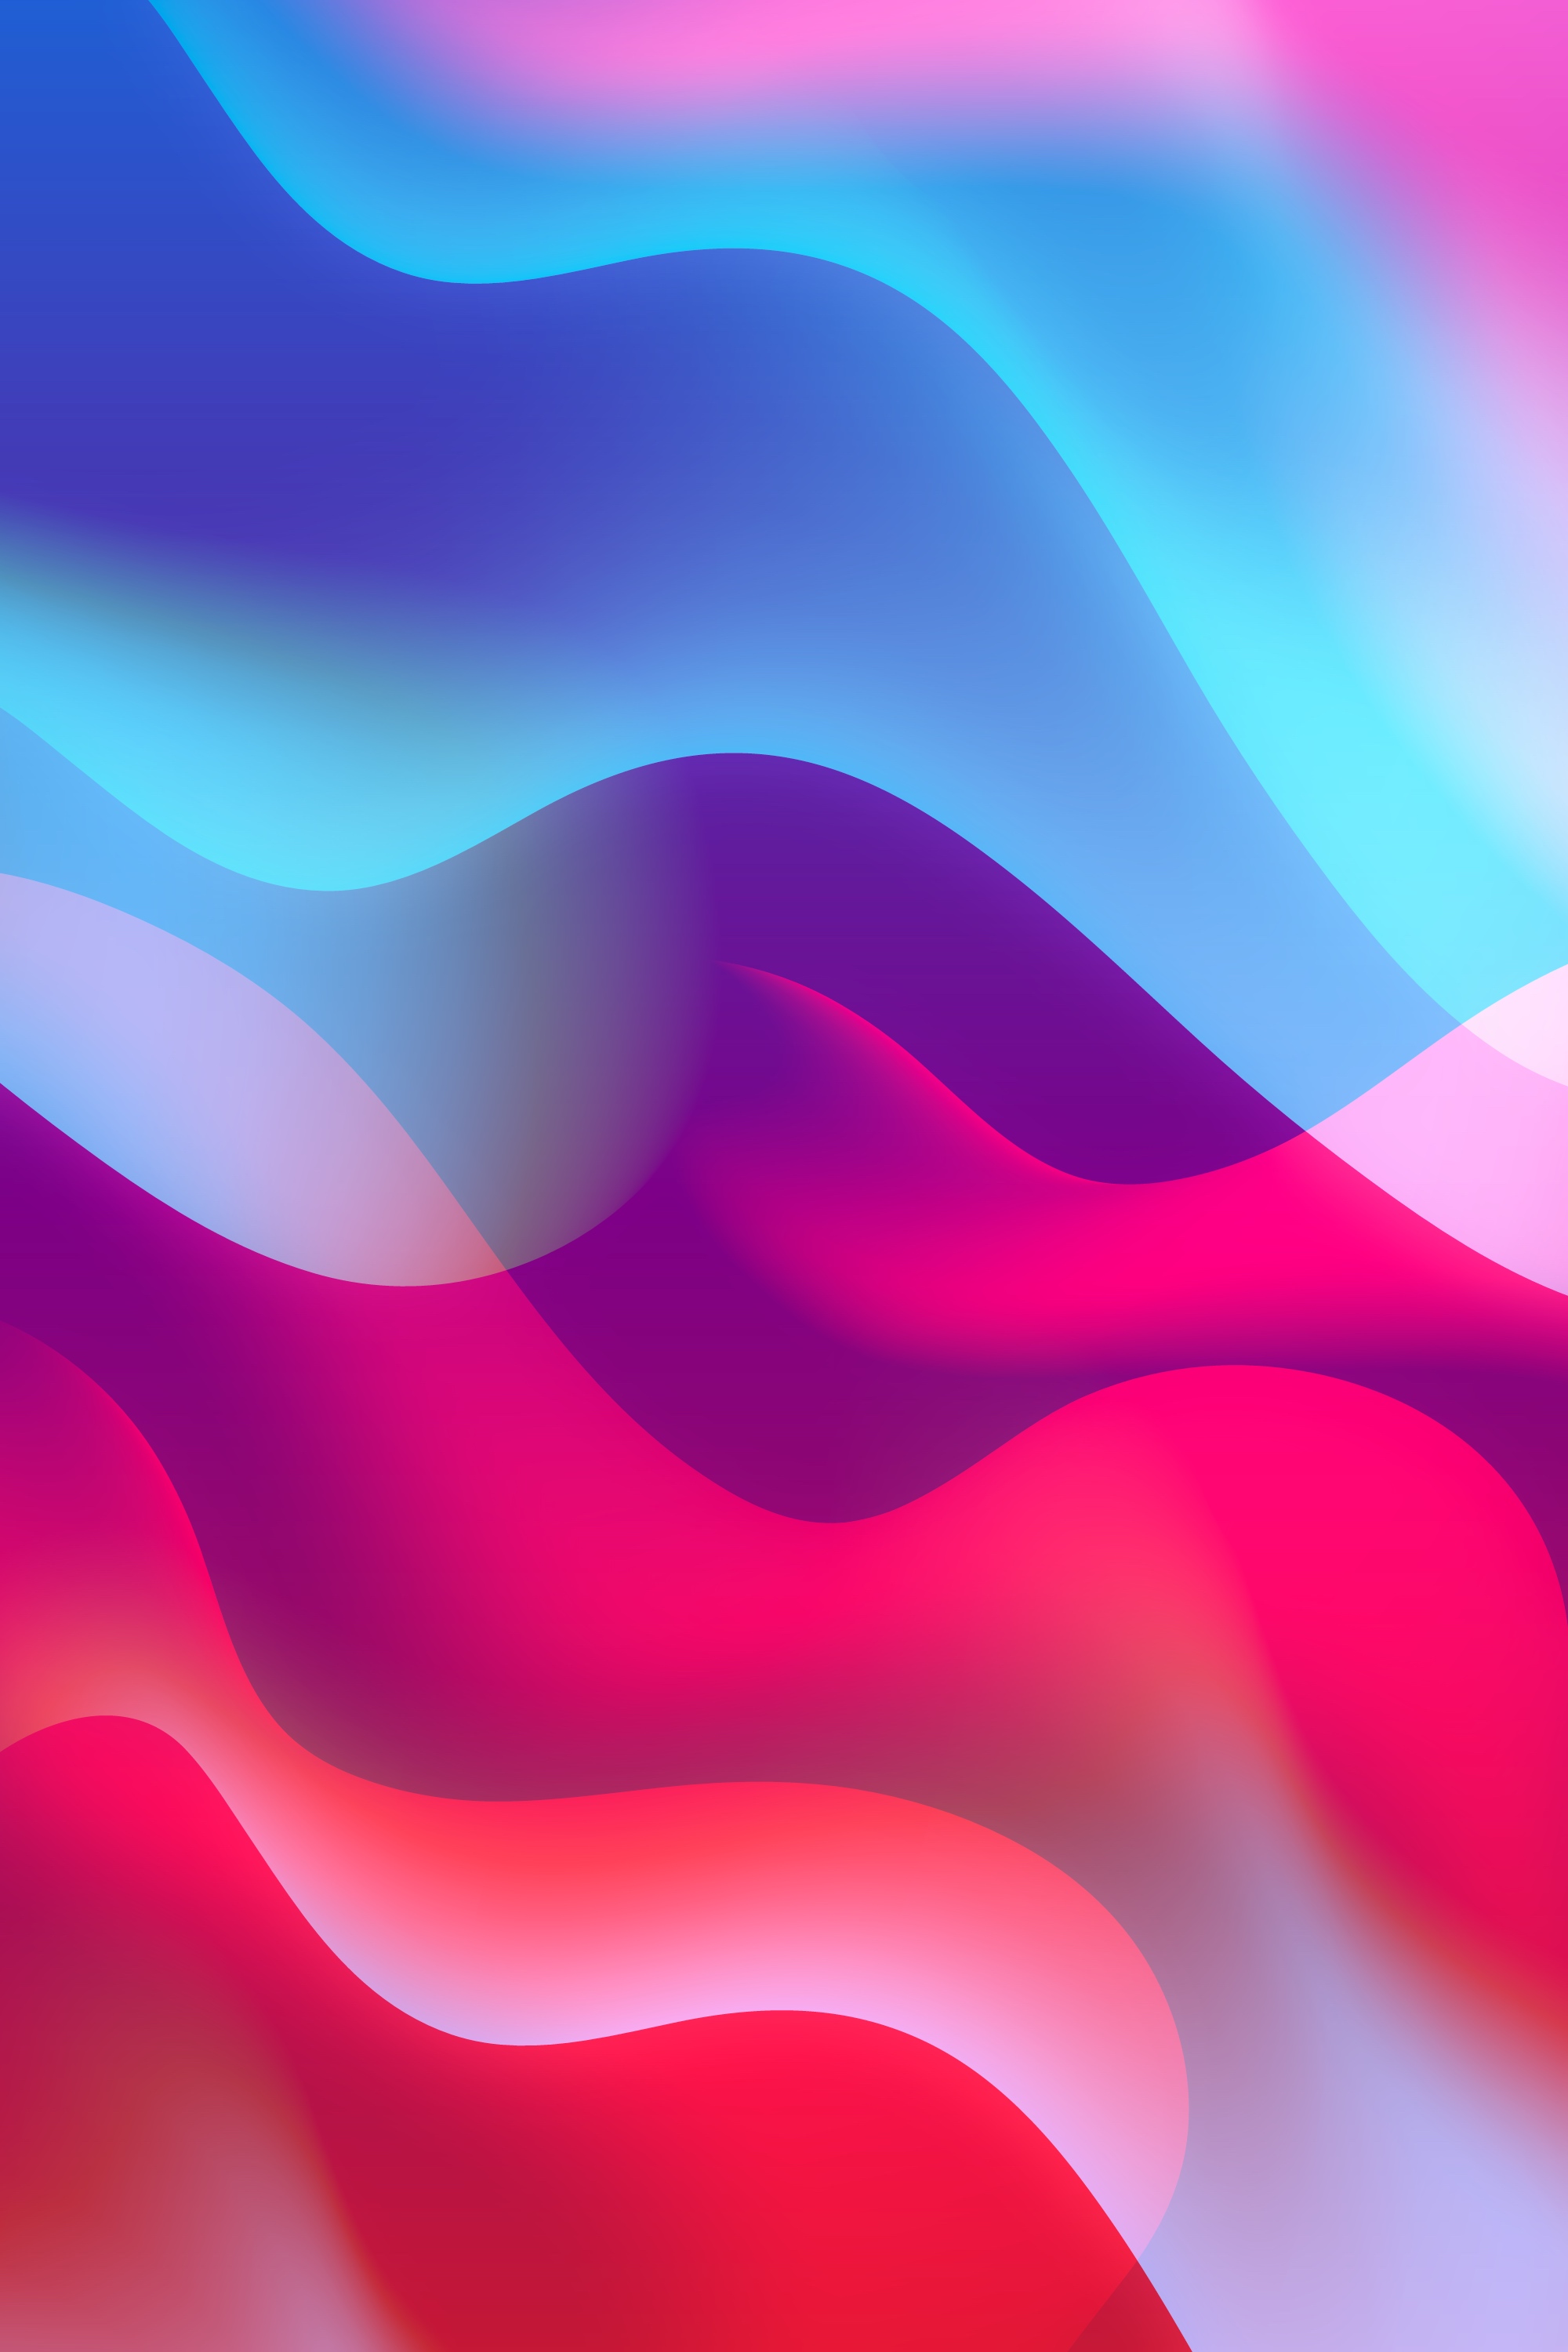 colour wallpaper download,blue,pink,purple,red,magenta